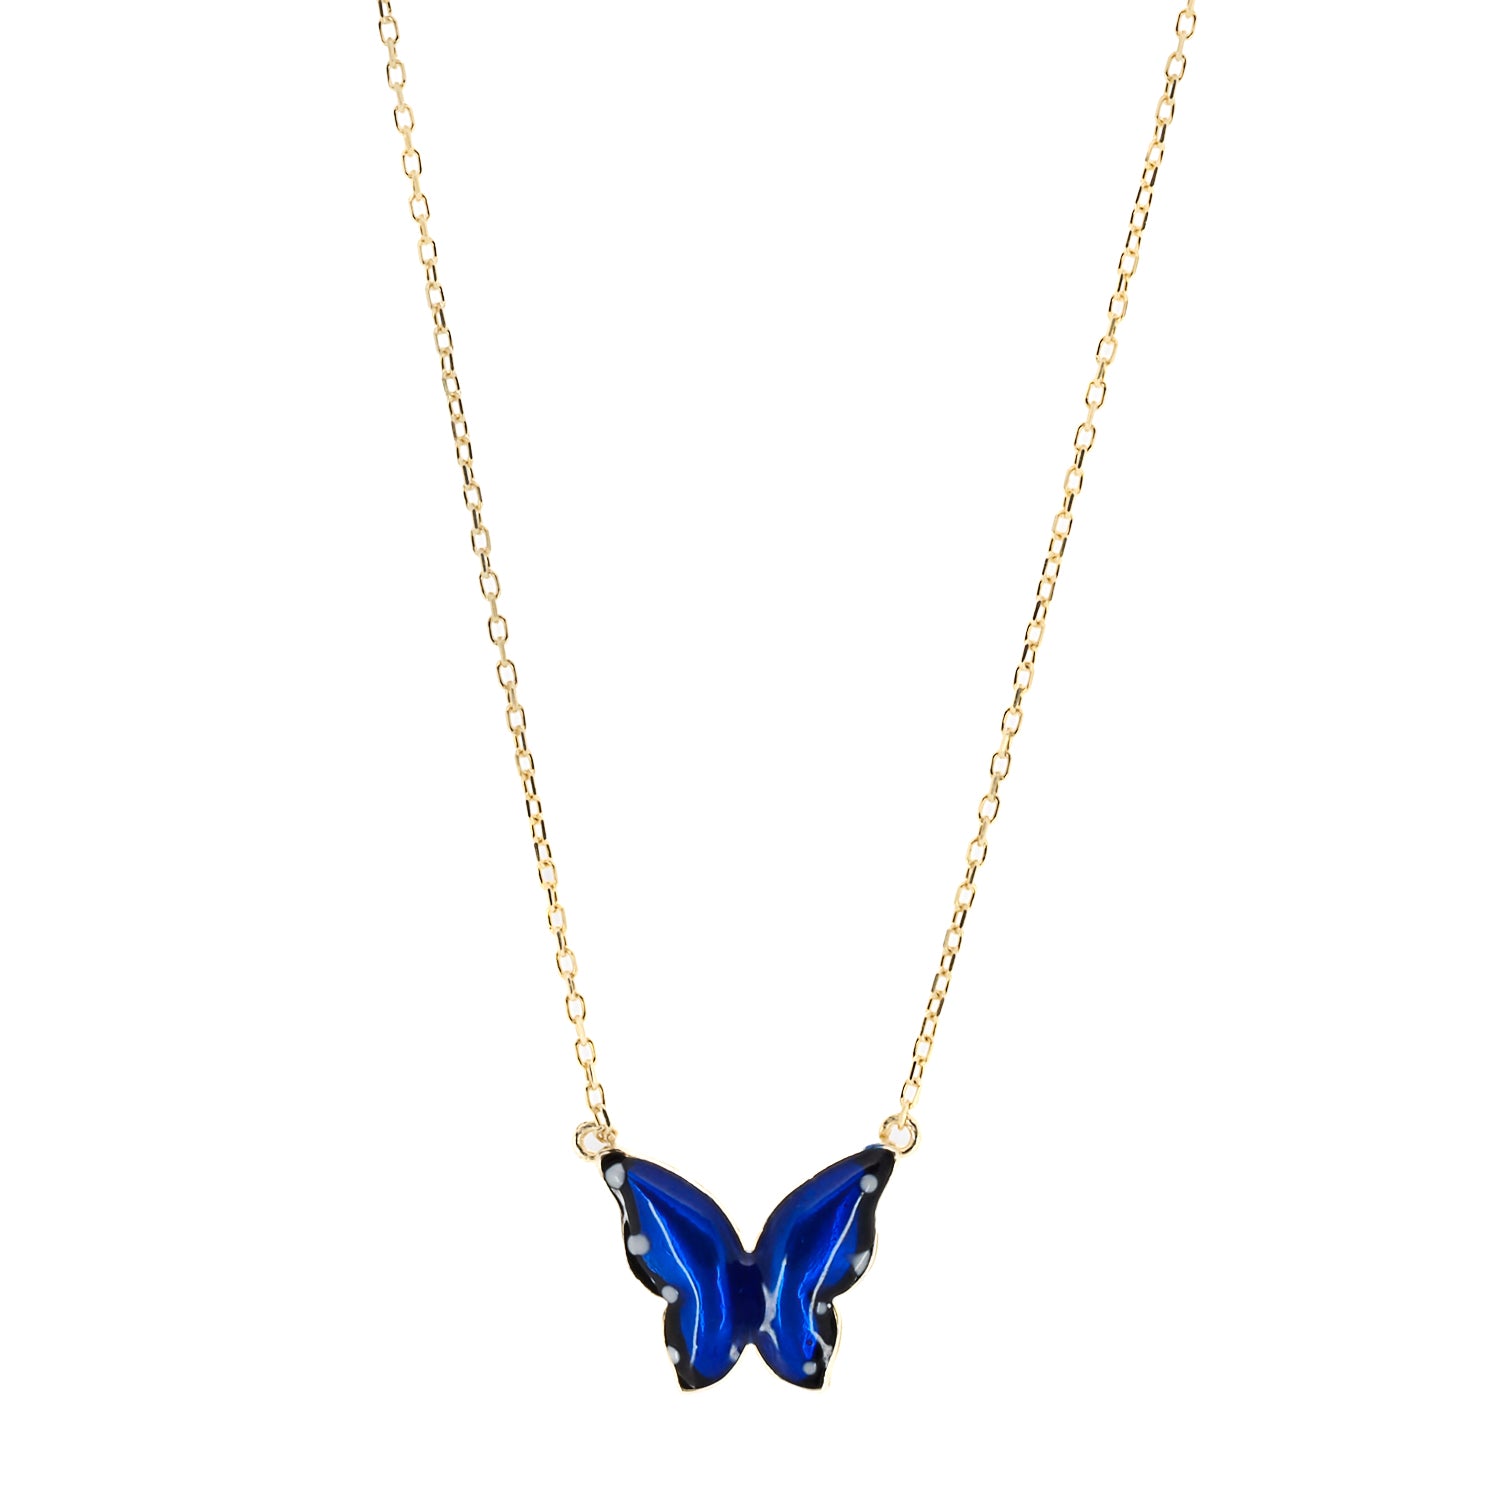 Detailed shot of the 925 sterling silver chain plated with 18K gold on the Gold Spiritual Blue Enamel Butterfly Necklace, showcasing its beauty and craftsmanship.